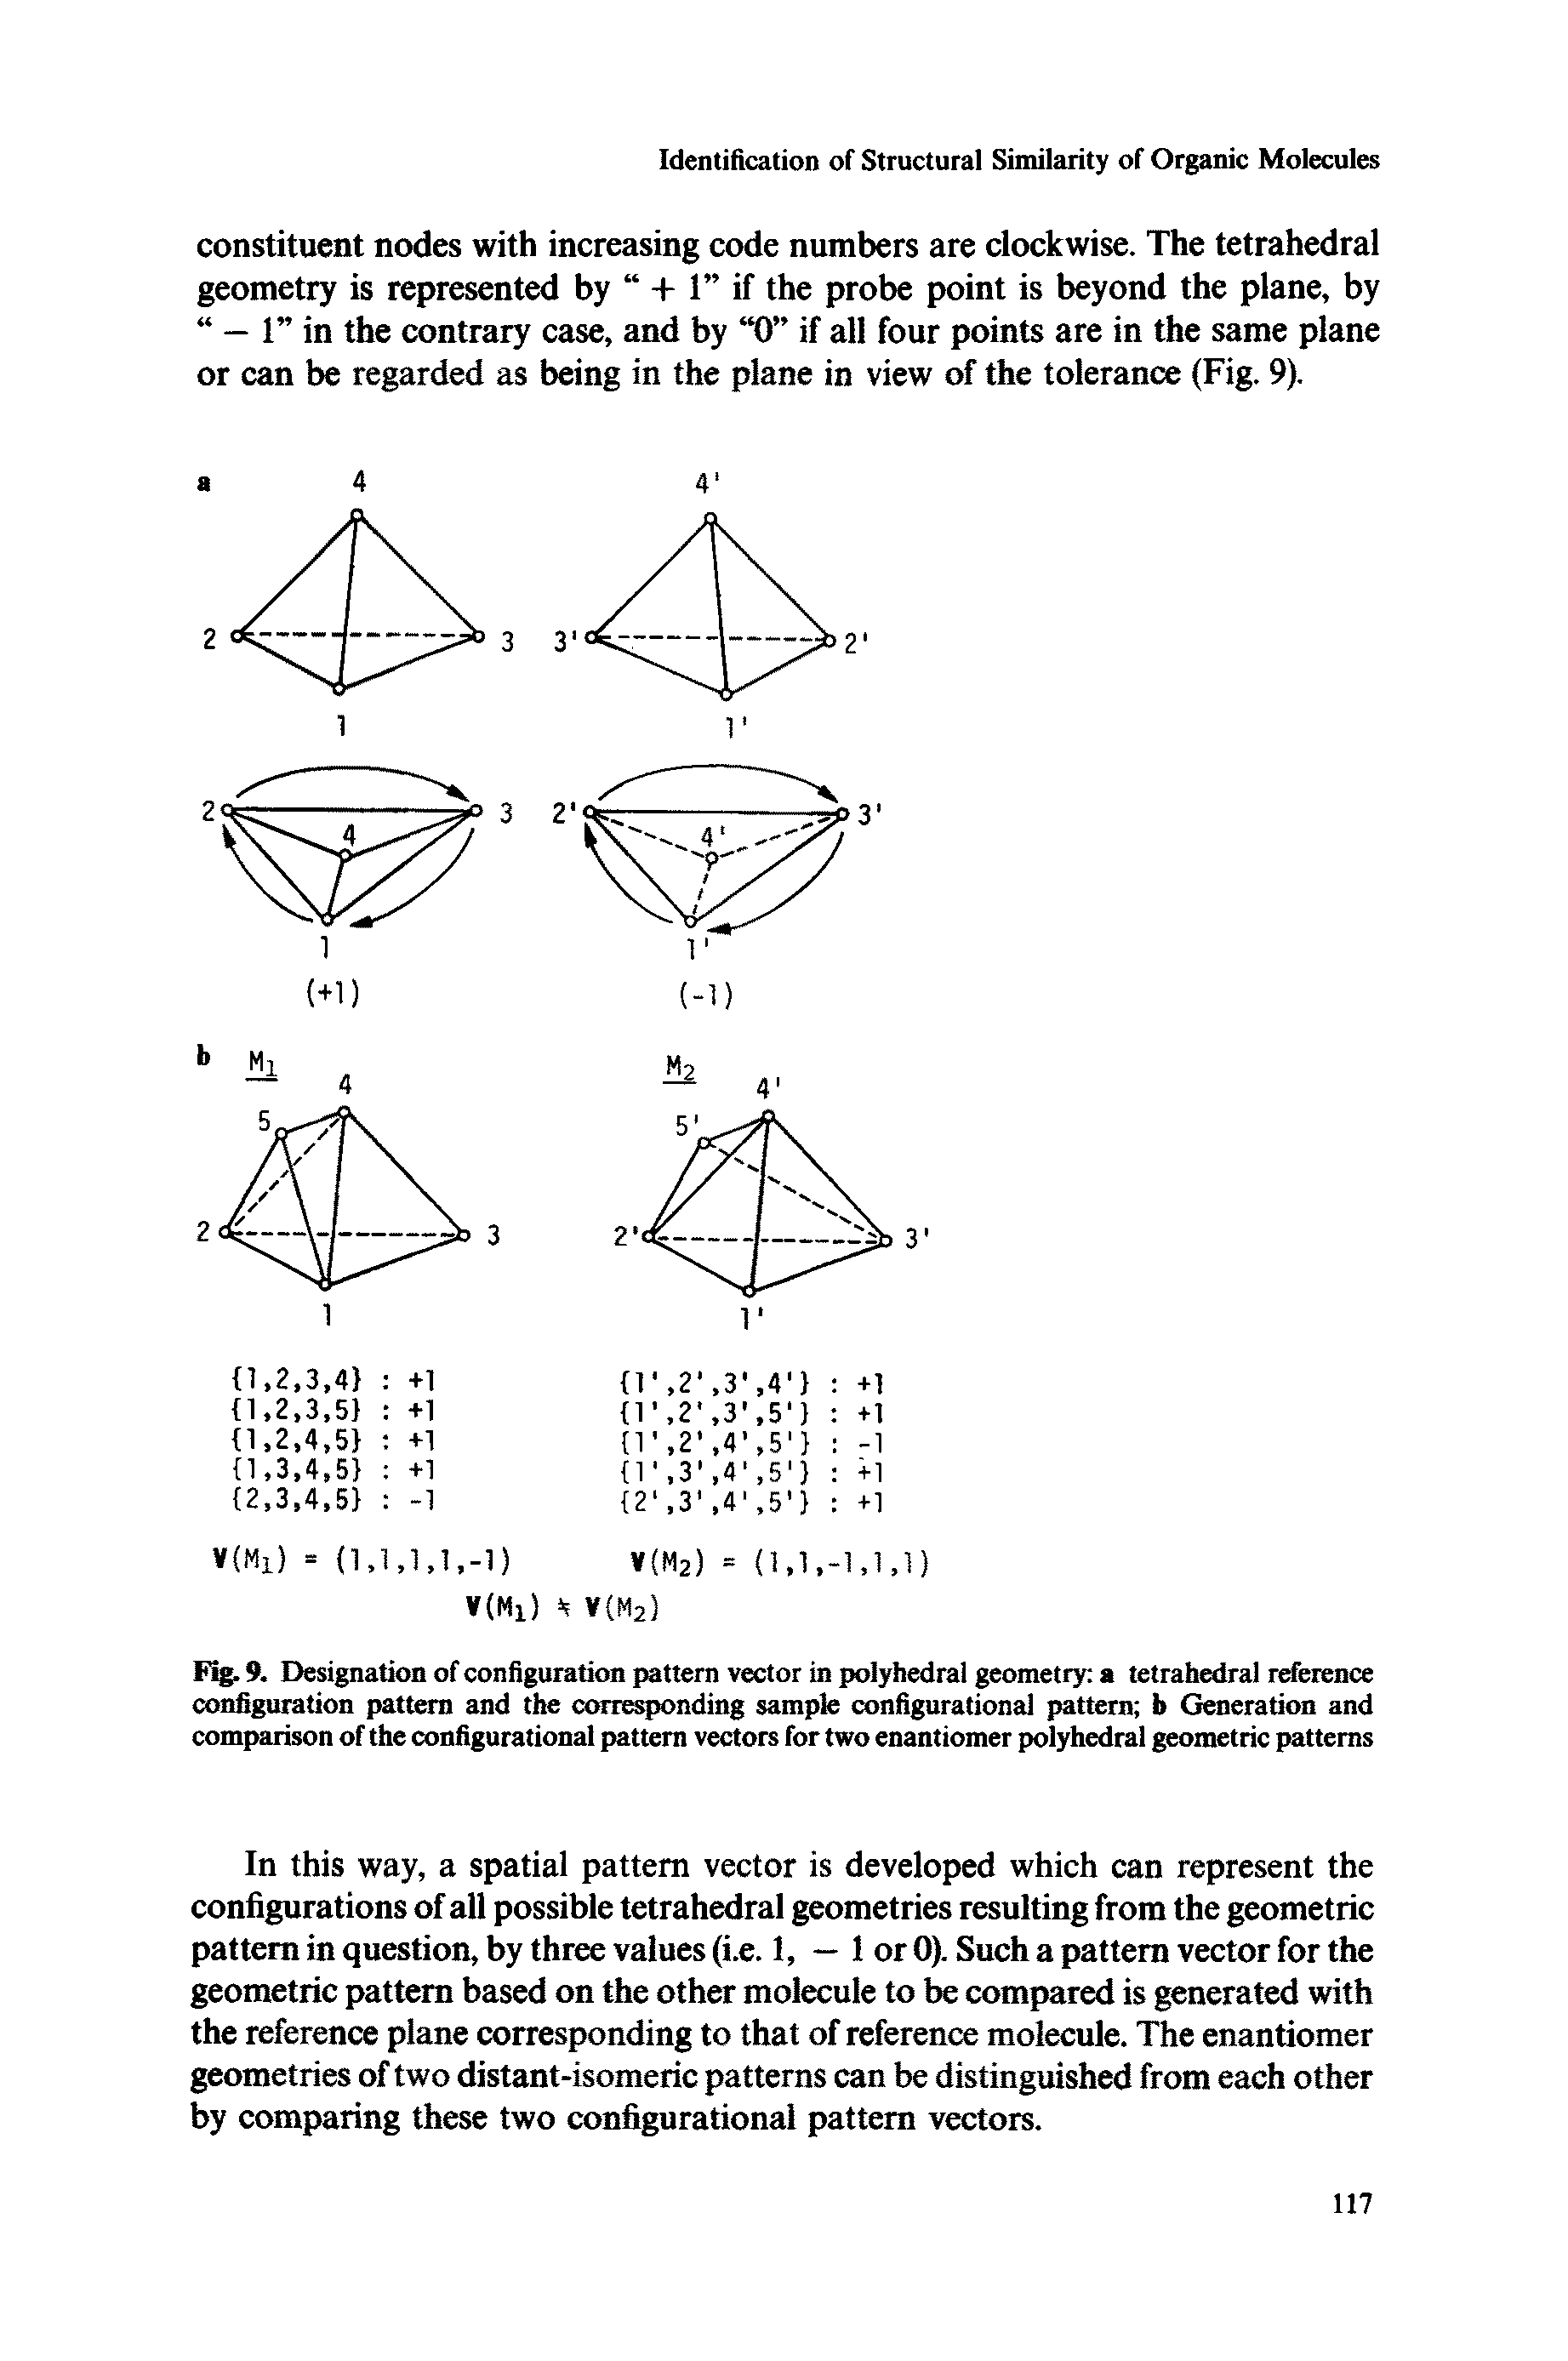 Fig. 9. Designation of configuration pattern vector in polyhedral geometry a tetrahedral reference configuration pattern and the corresponding sample configurational pattern b Generation and comparison of the configurational pattern vectors for two enantiomer polyhedral geometric patterns...